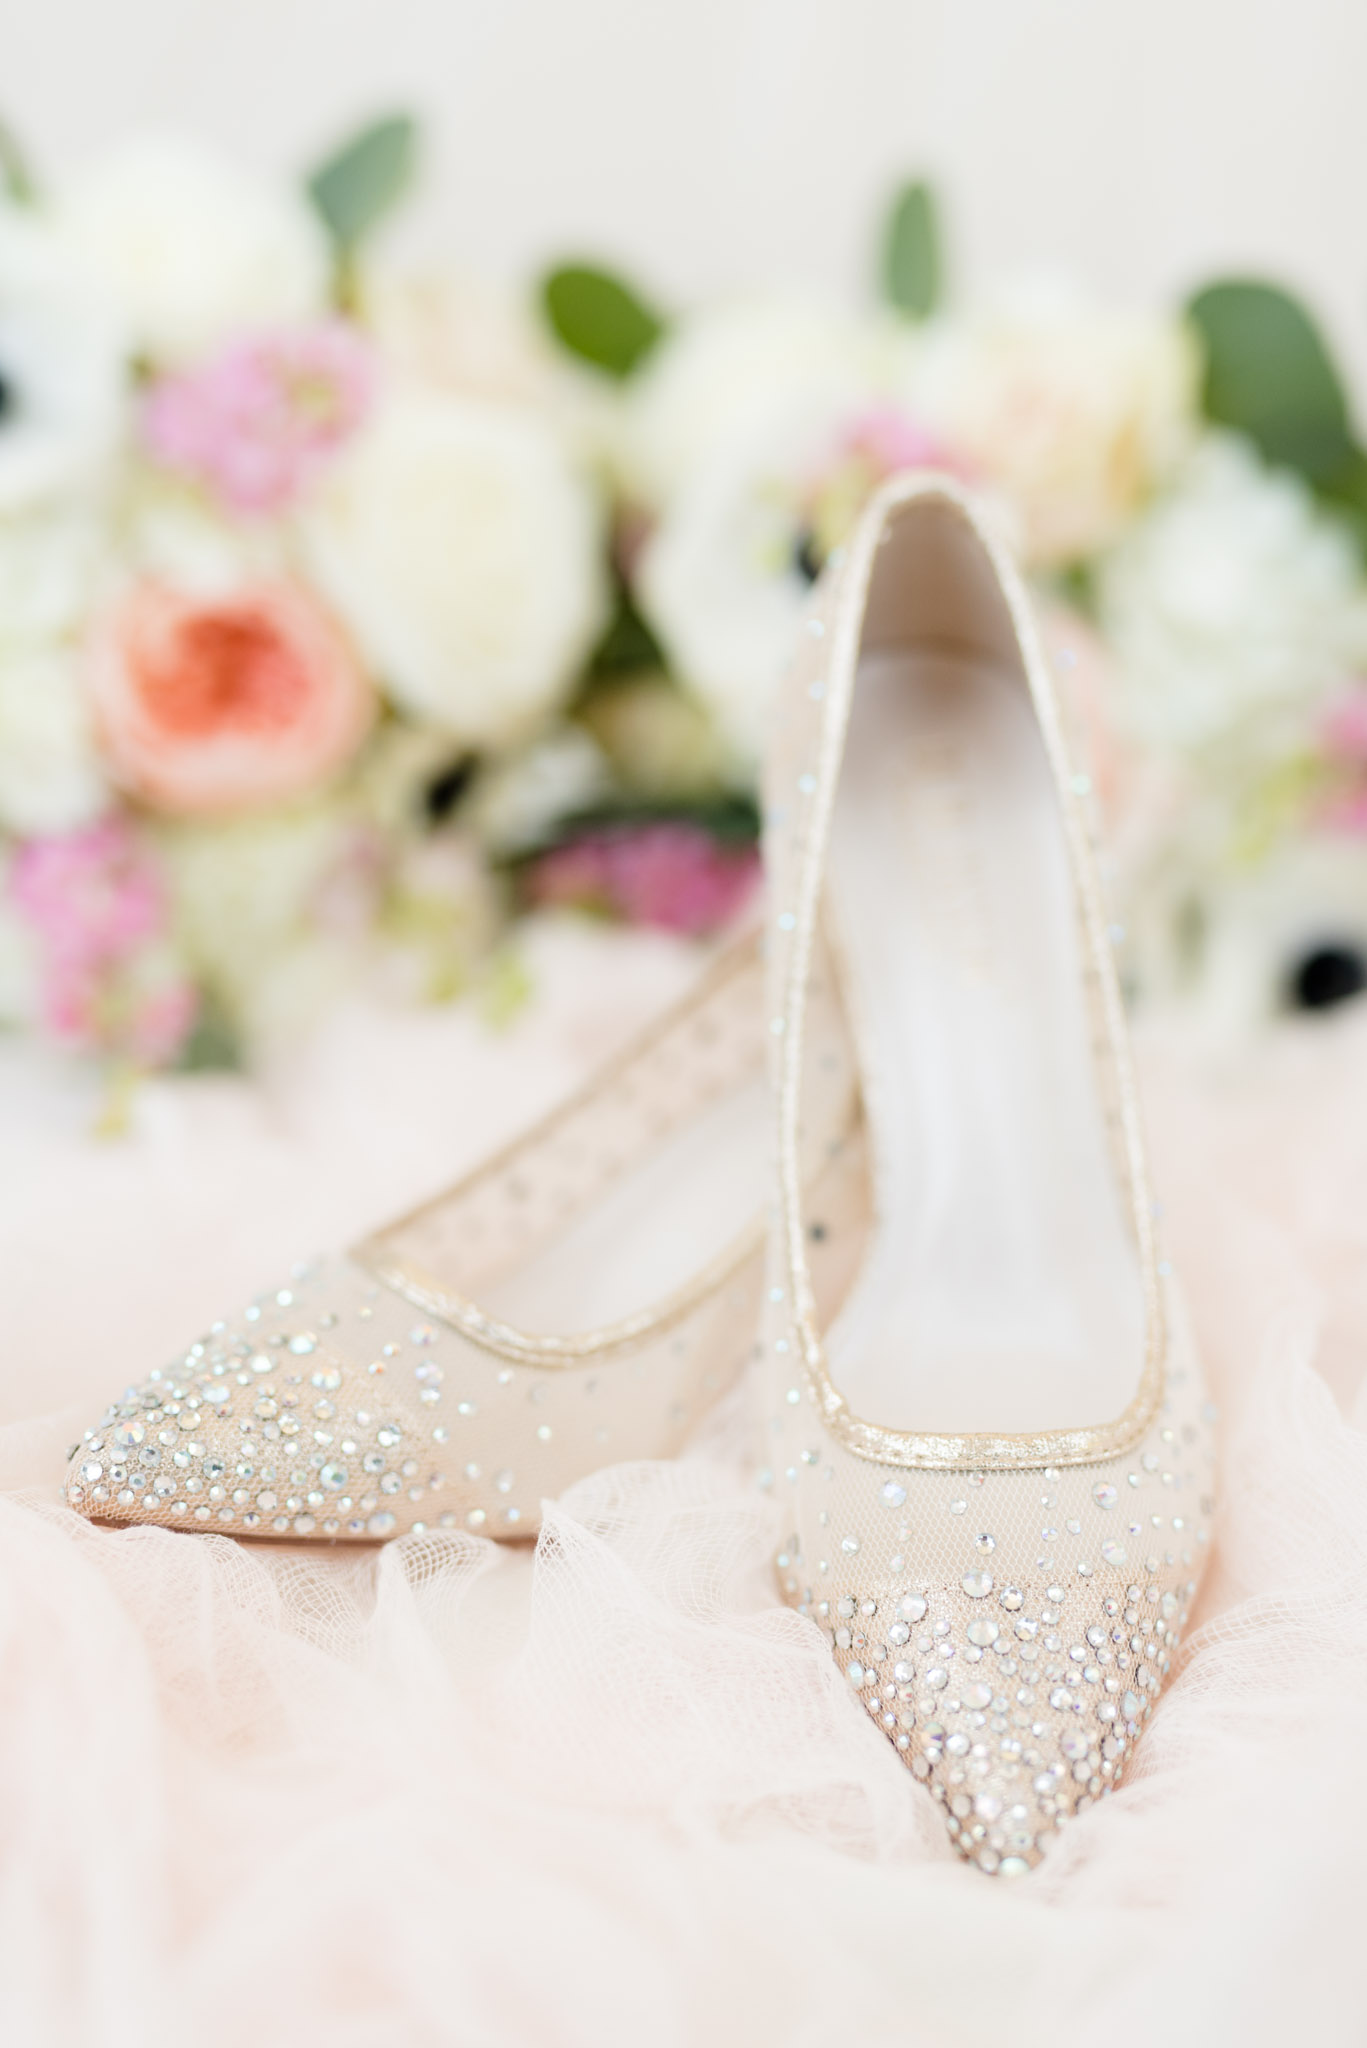 Bridal shoes sit on pink tulle.